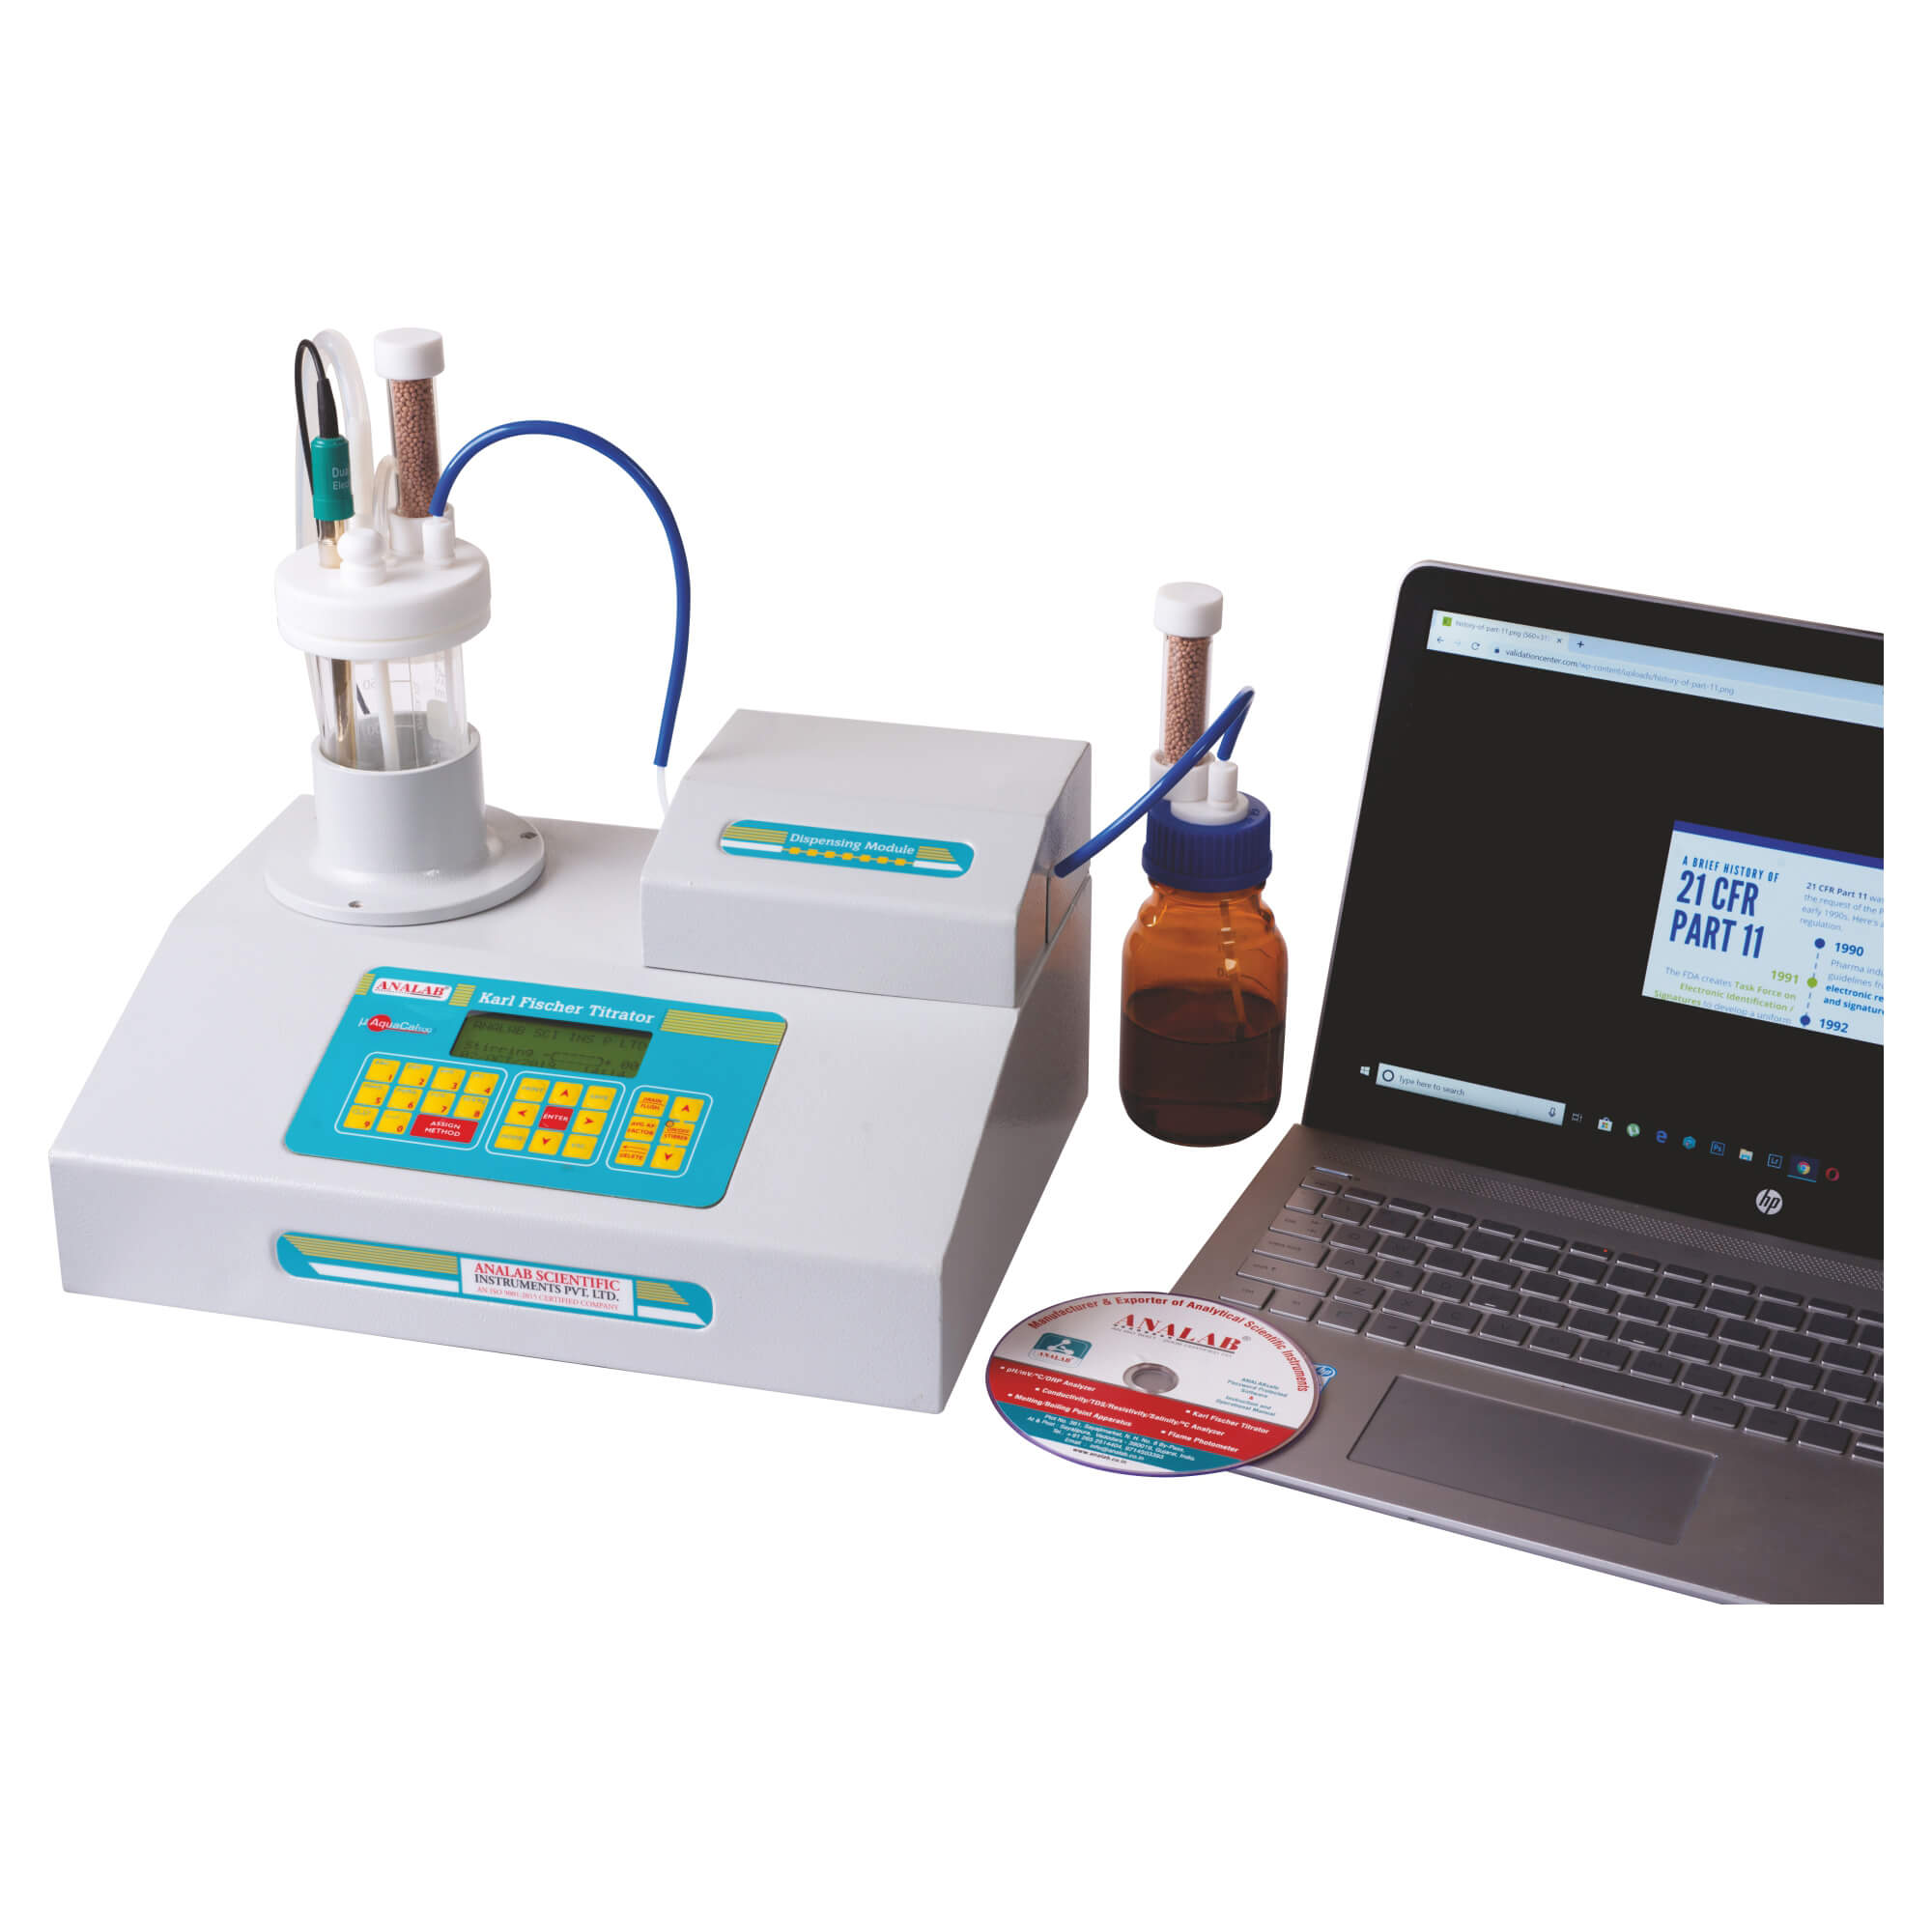 Microcontroller Based Karl Fischer Titrator With 21 CFR Part-11 Compliance Manufacturer in India